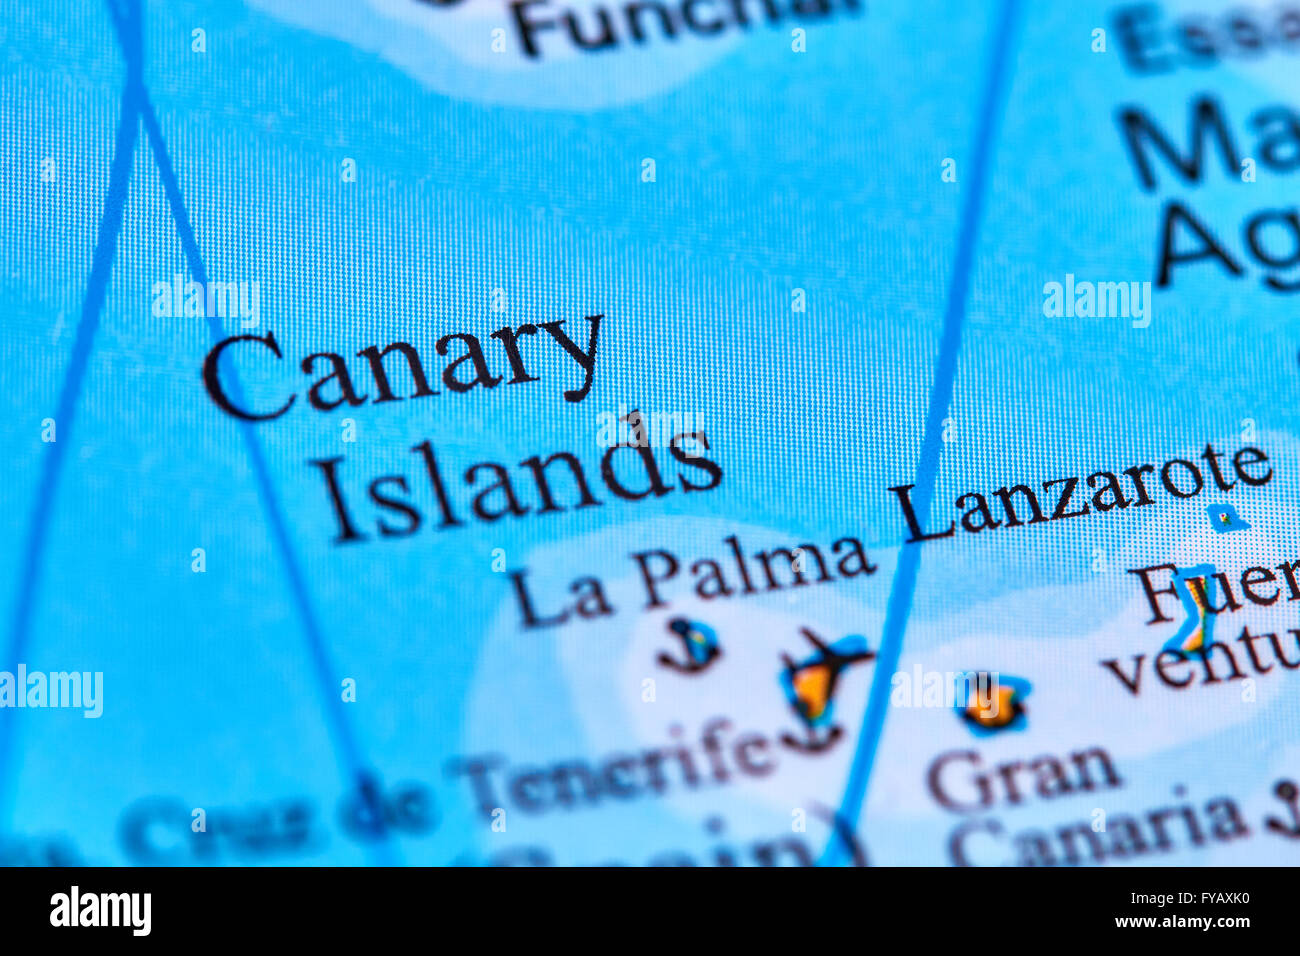 Canary Islands on the World Map Stock Photo